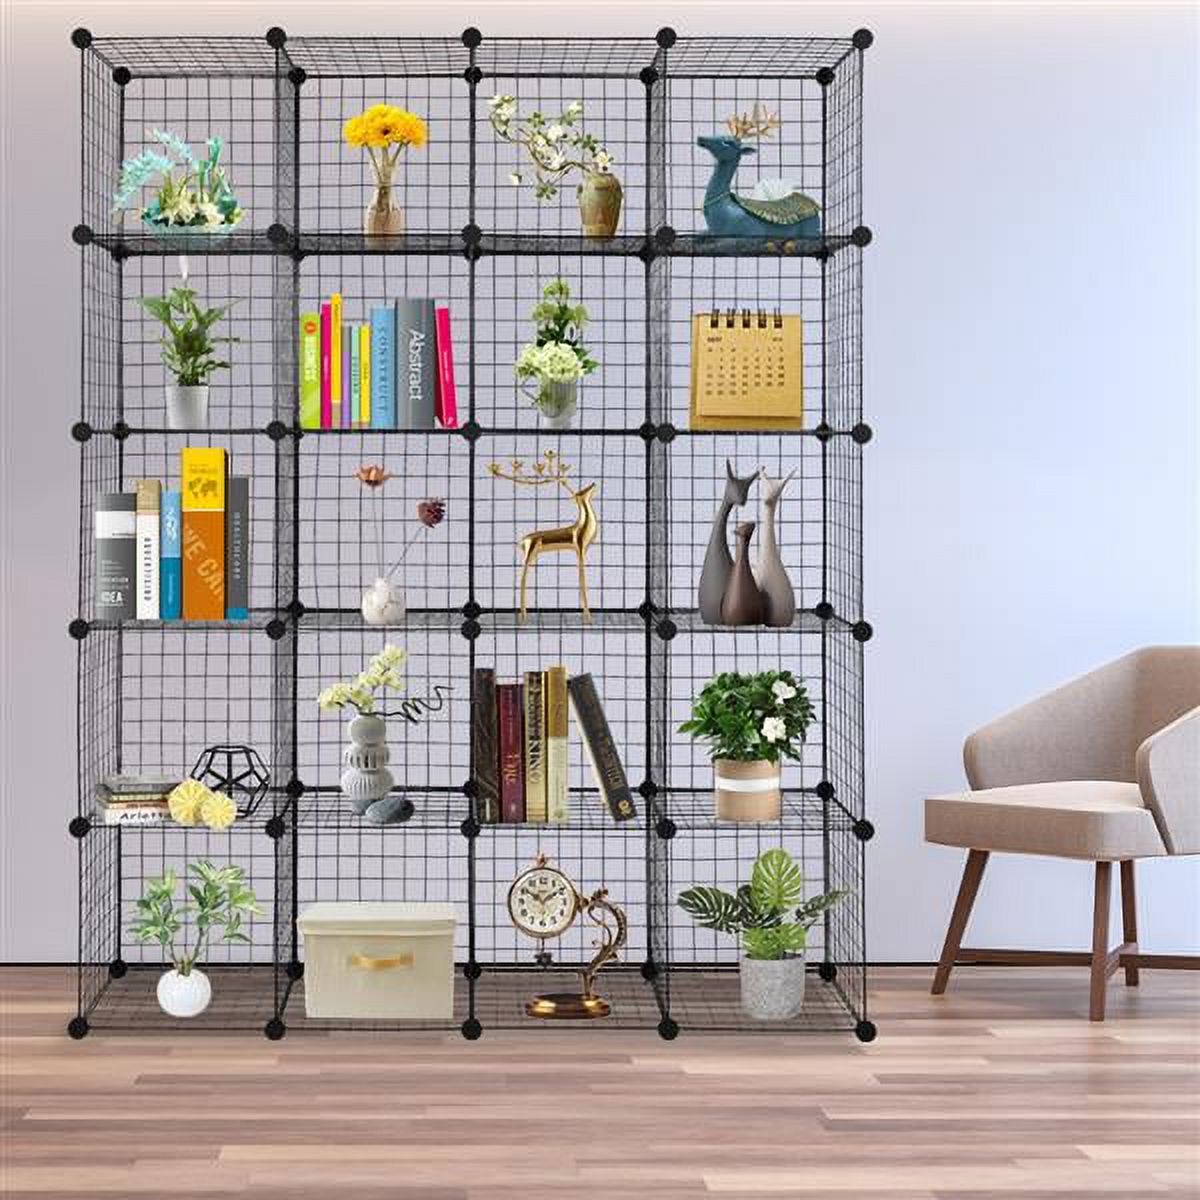 Cube Storage 20-Cube Metal Wire Cube Storage Cubes Shelves Cube Closet Organizer Stackable Storage Bins DIY Storage Grids Modular Wire Cubes Bookshelf Bookcase for Home Office - image 2 of 5